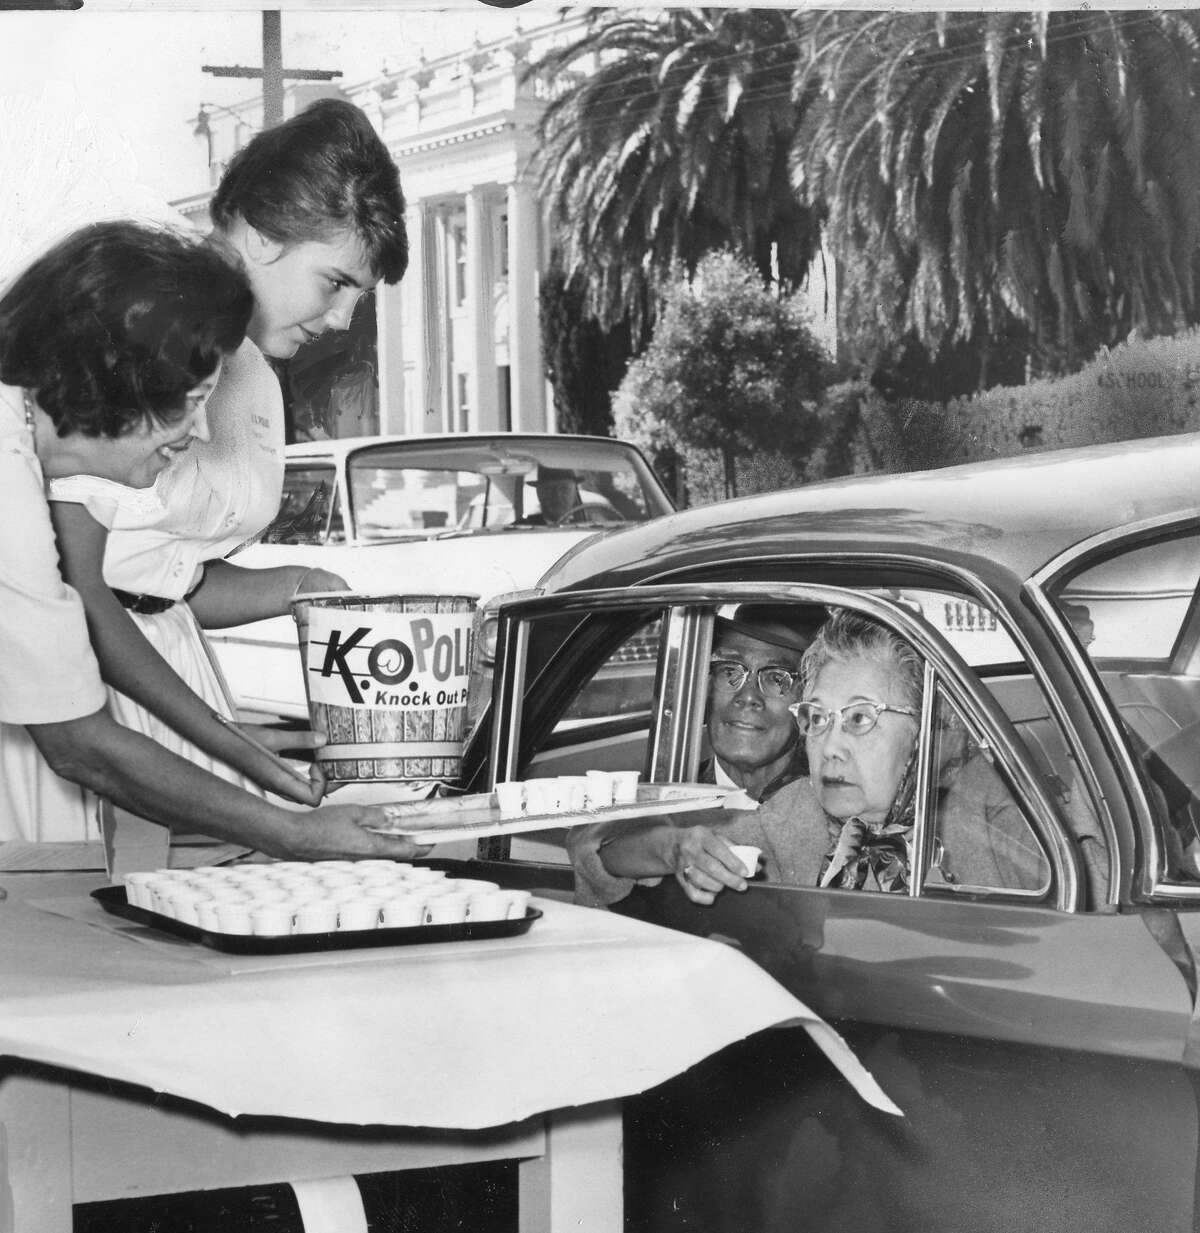 The K.O. Polio campaign would distribute millions of doses of vaccine via sugar cubes, September 1962 Dorothy Michels and Karen Merchant pass vaccine to Carmen Guerrero at a a curbside service September 29, 1962